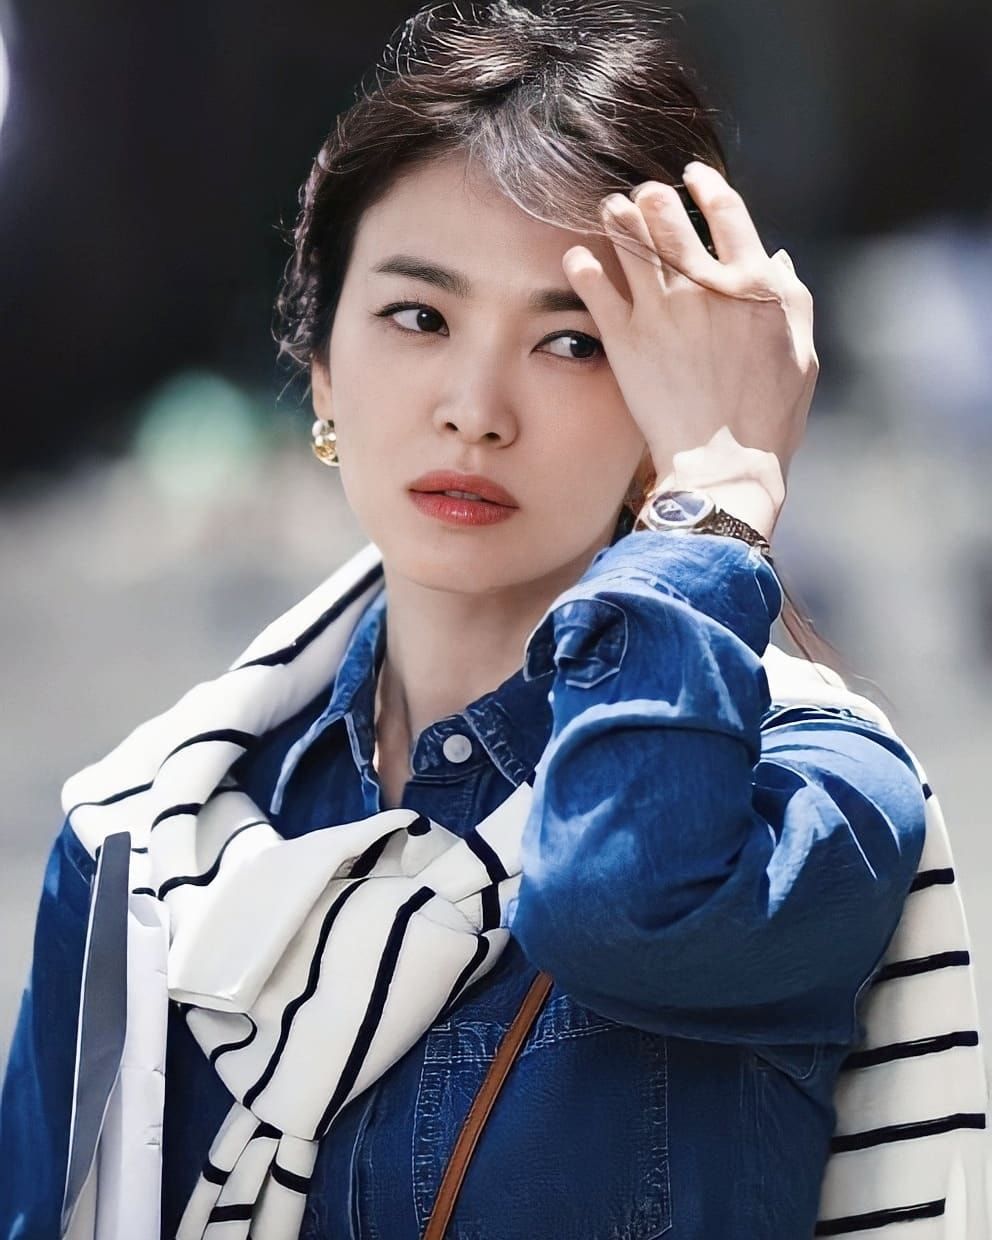 Shut up Sweet heart
Happy 40th birthday to you, Song Hye-Kyo 